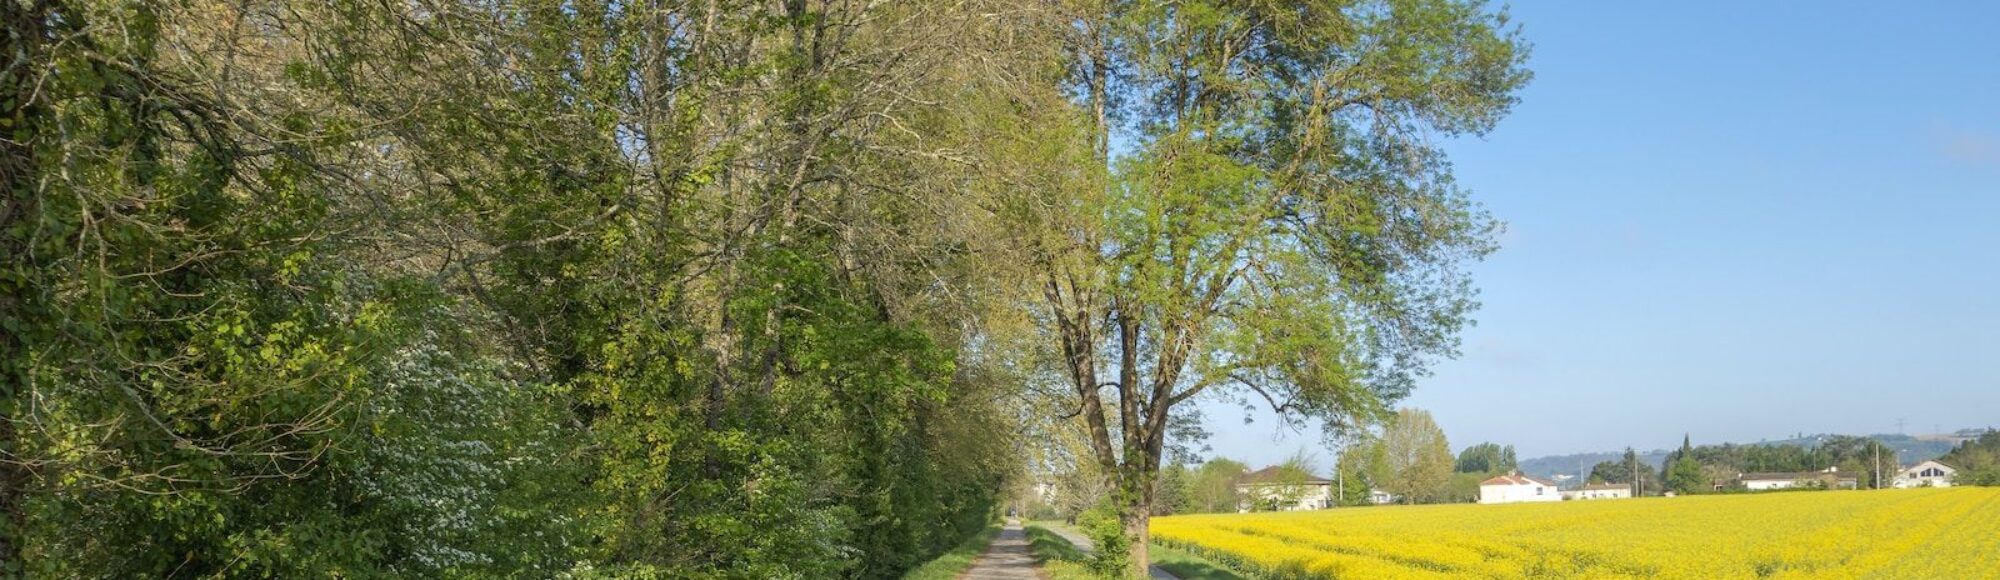 a person riding a motorcycle on a dirt road surrounded by yellow flowers